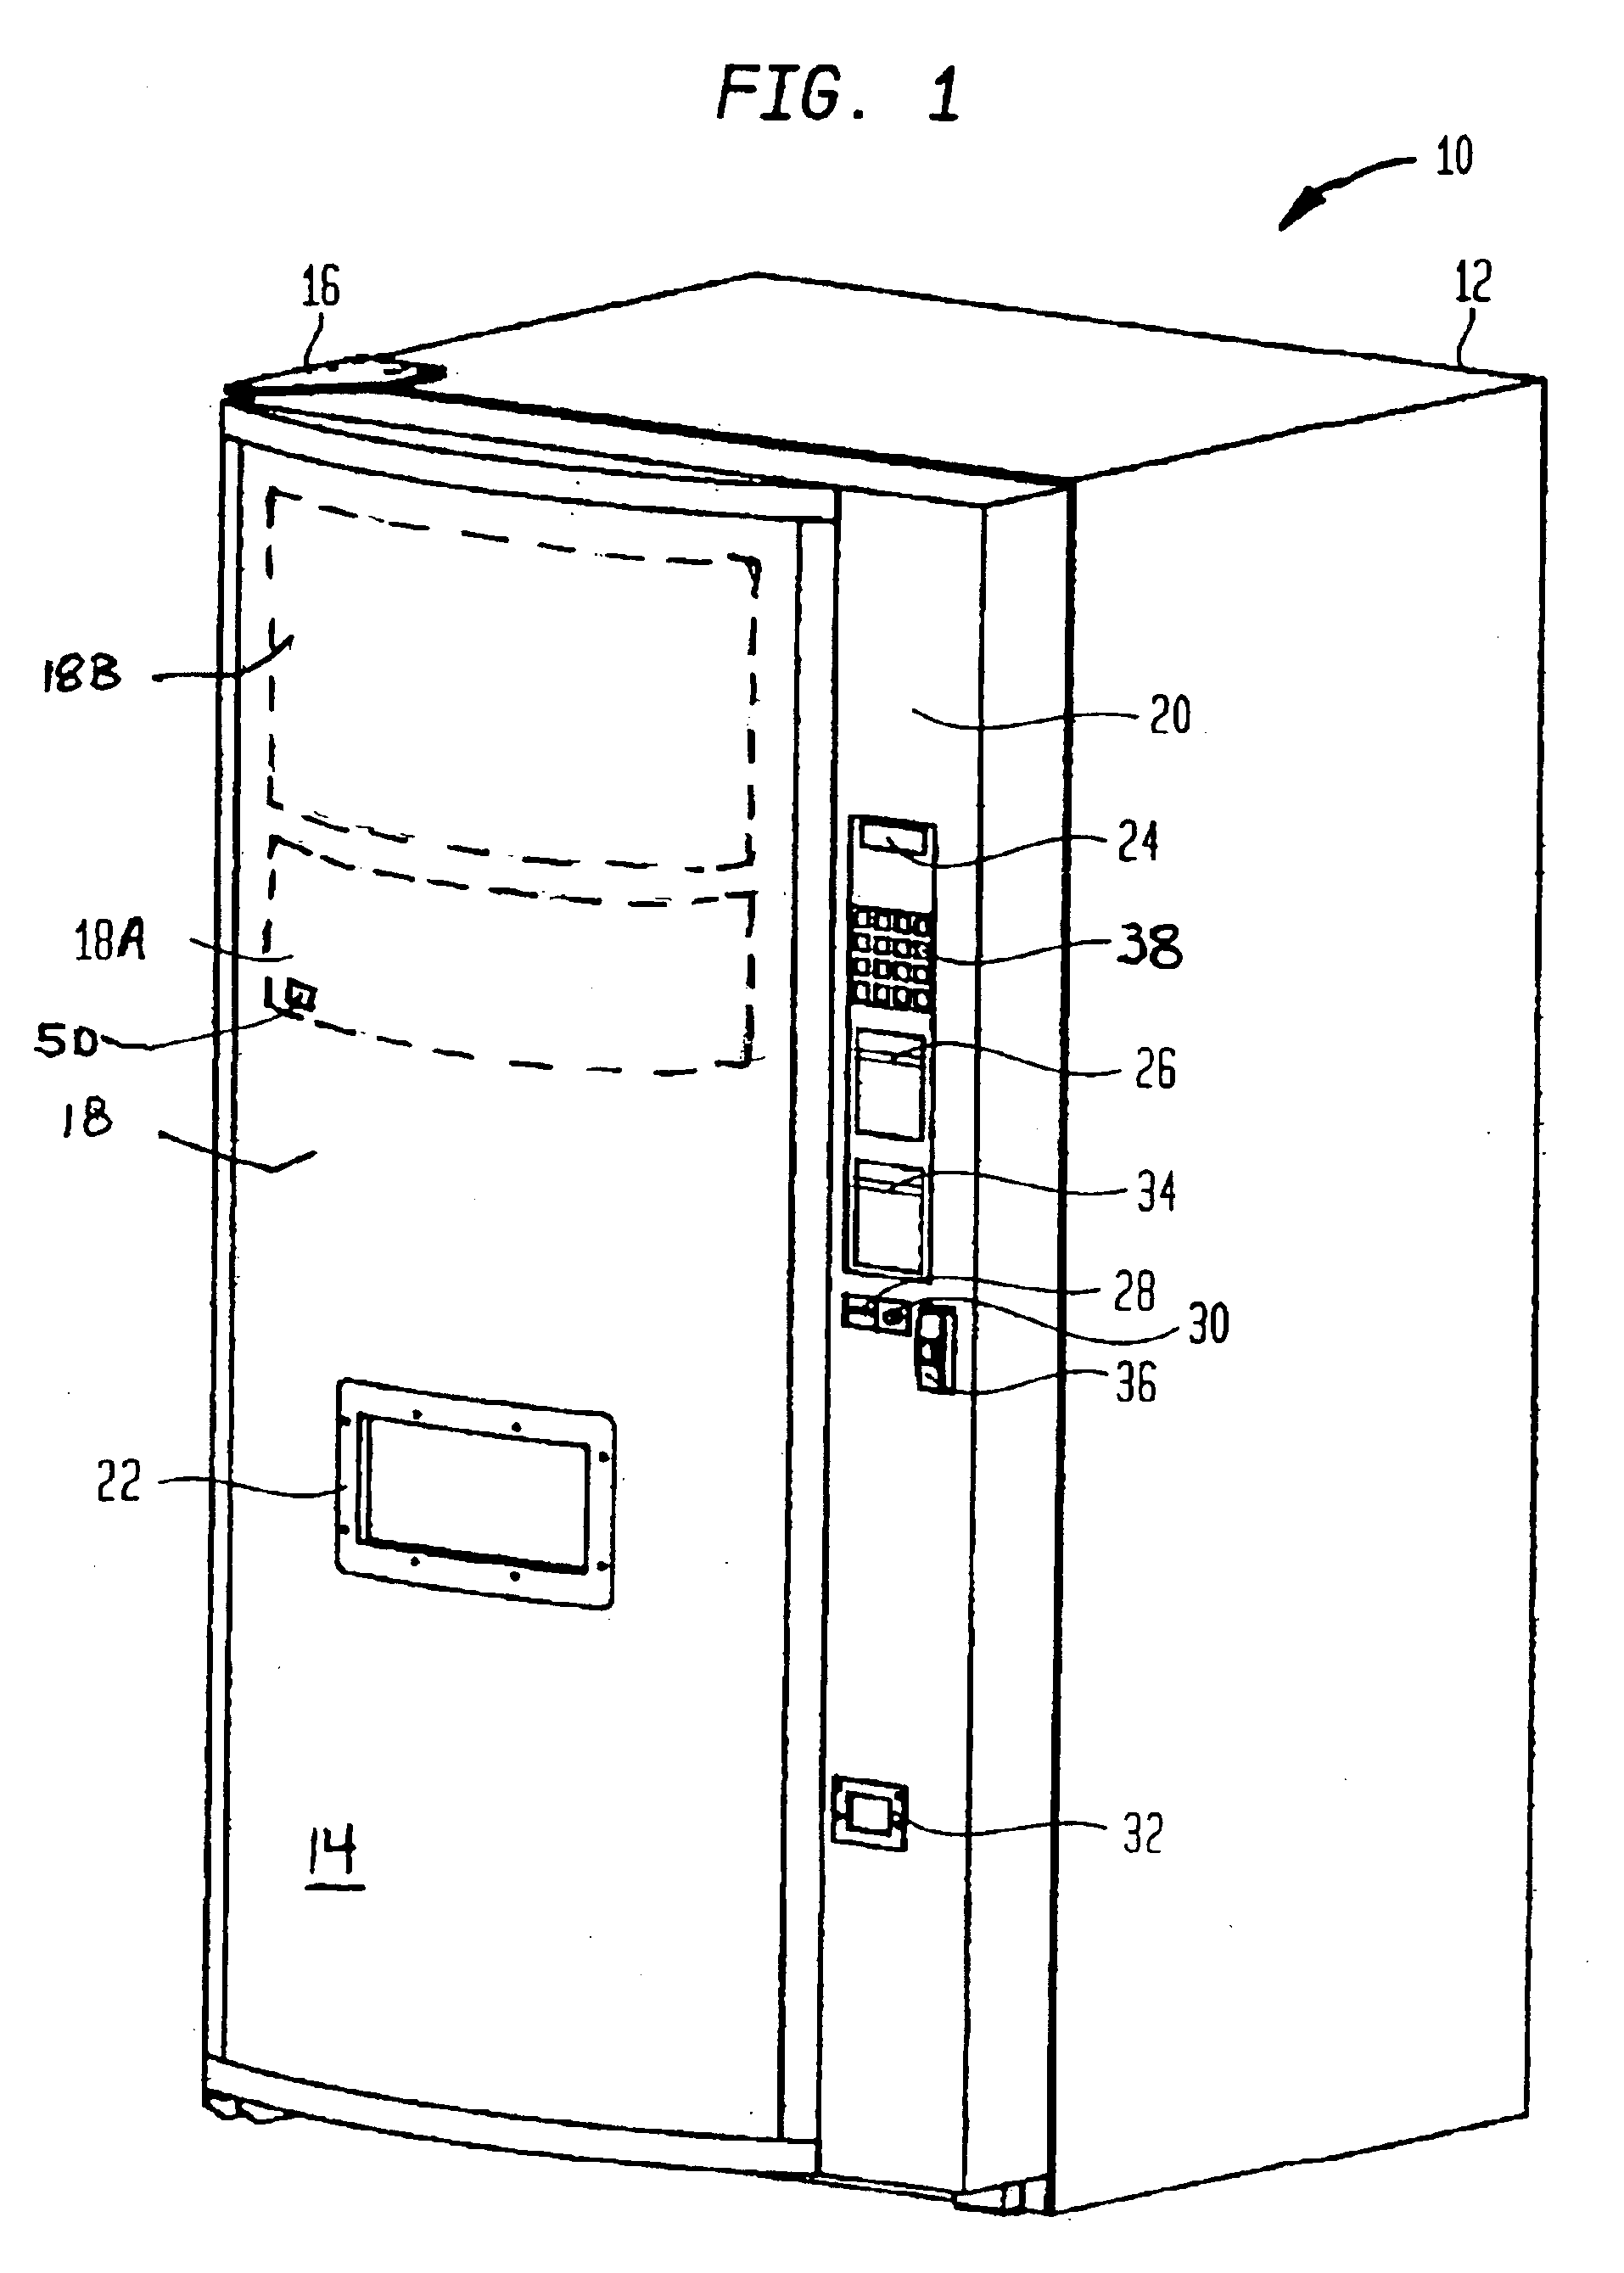 Method and apparatus for controlling rented or leased or loaned equipment